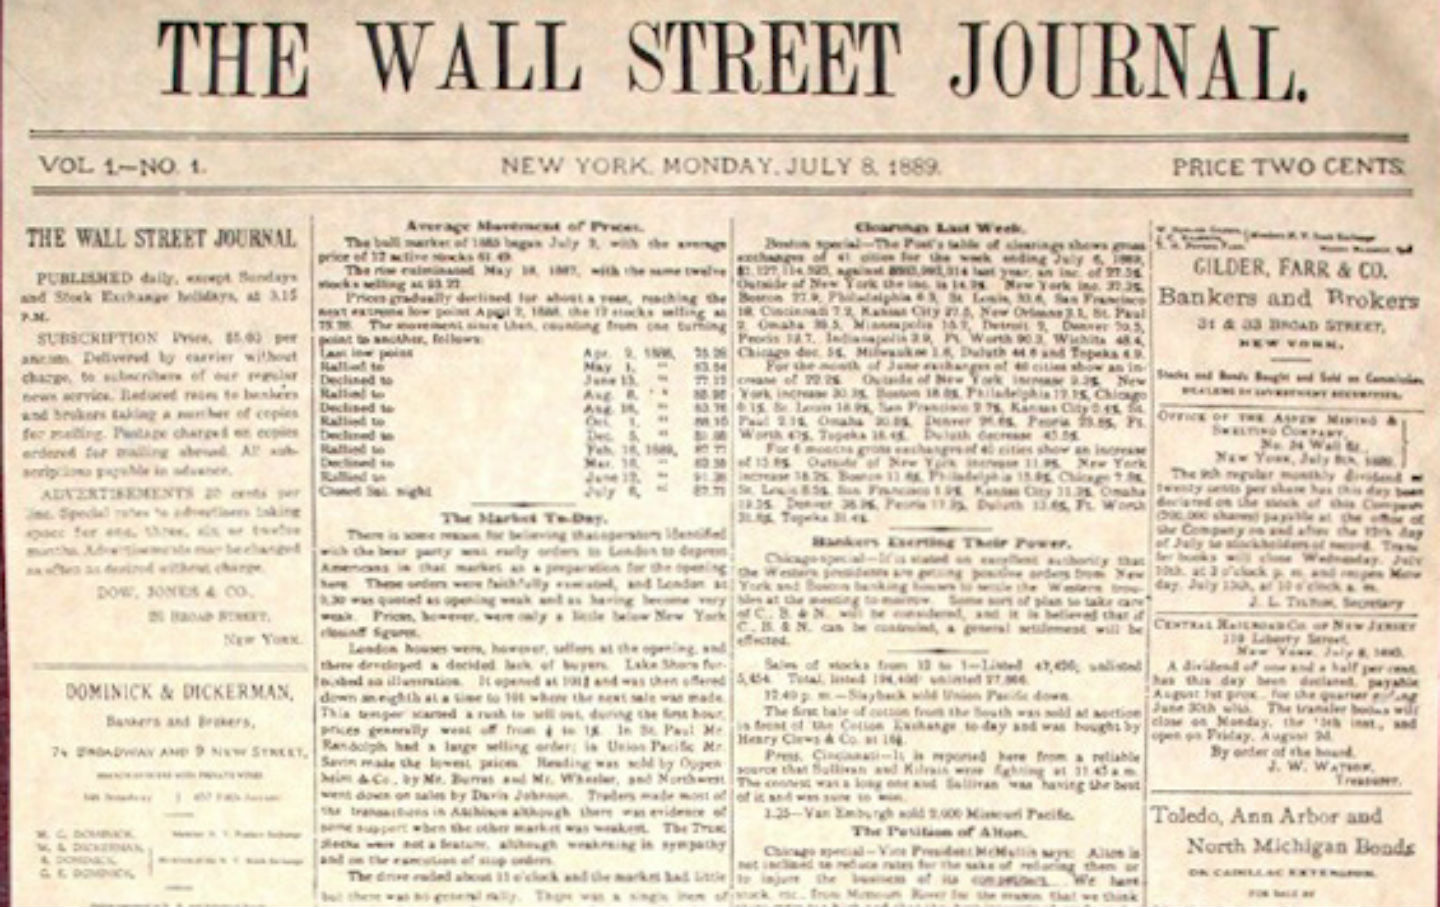 Tearing Down The Wall Street Journal's “Mansion”